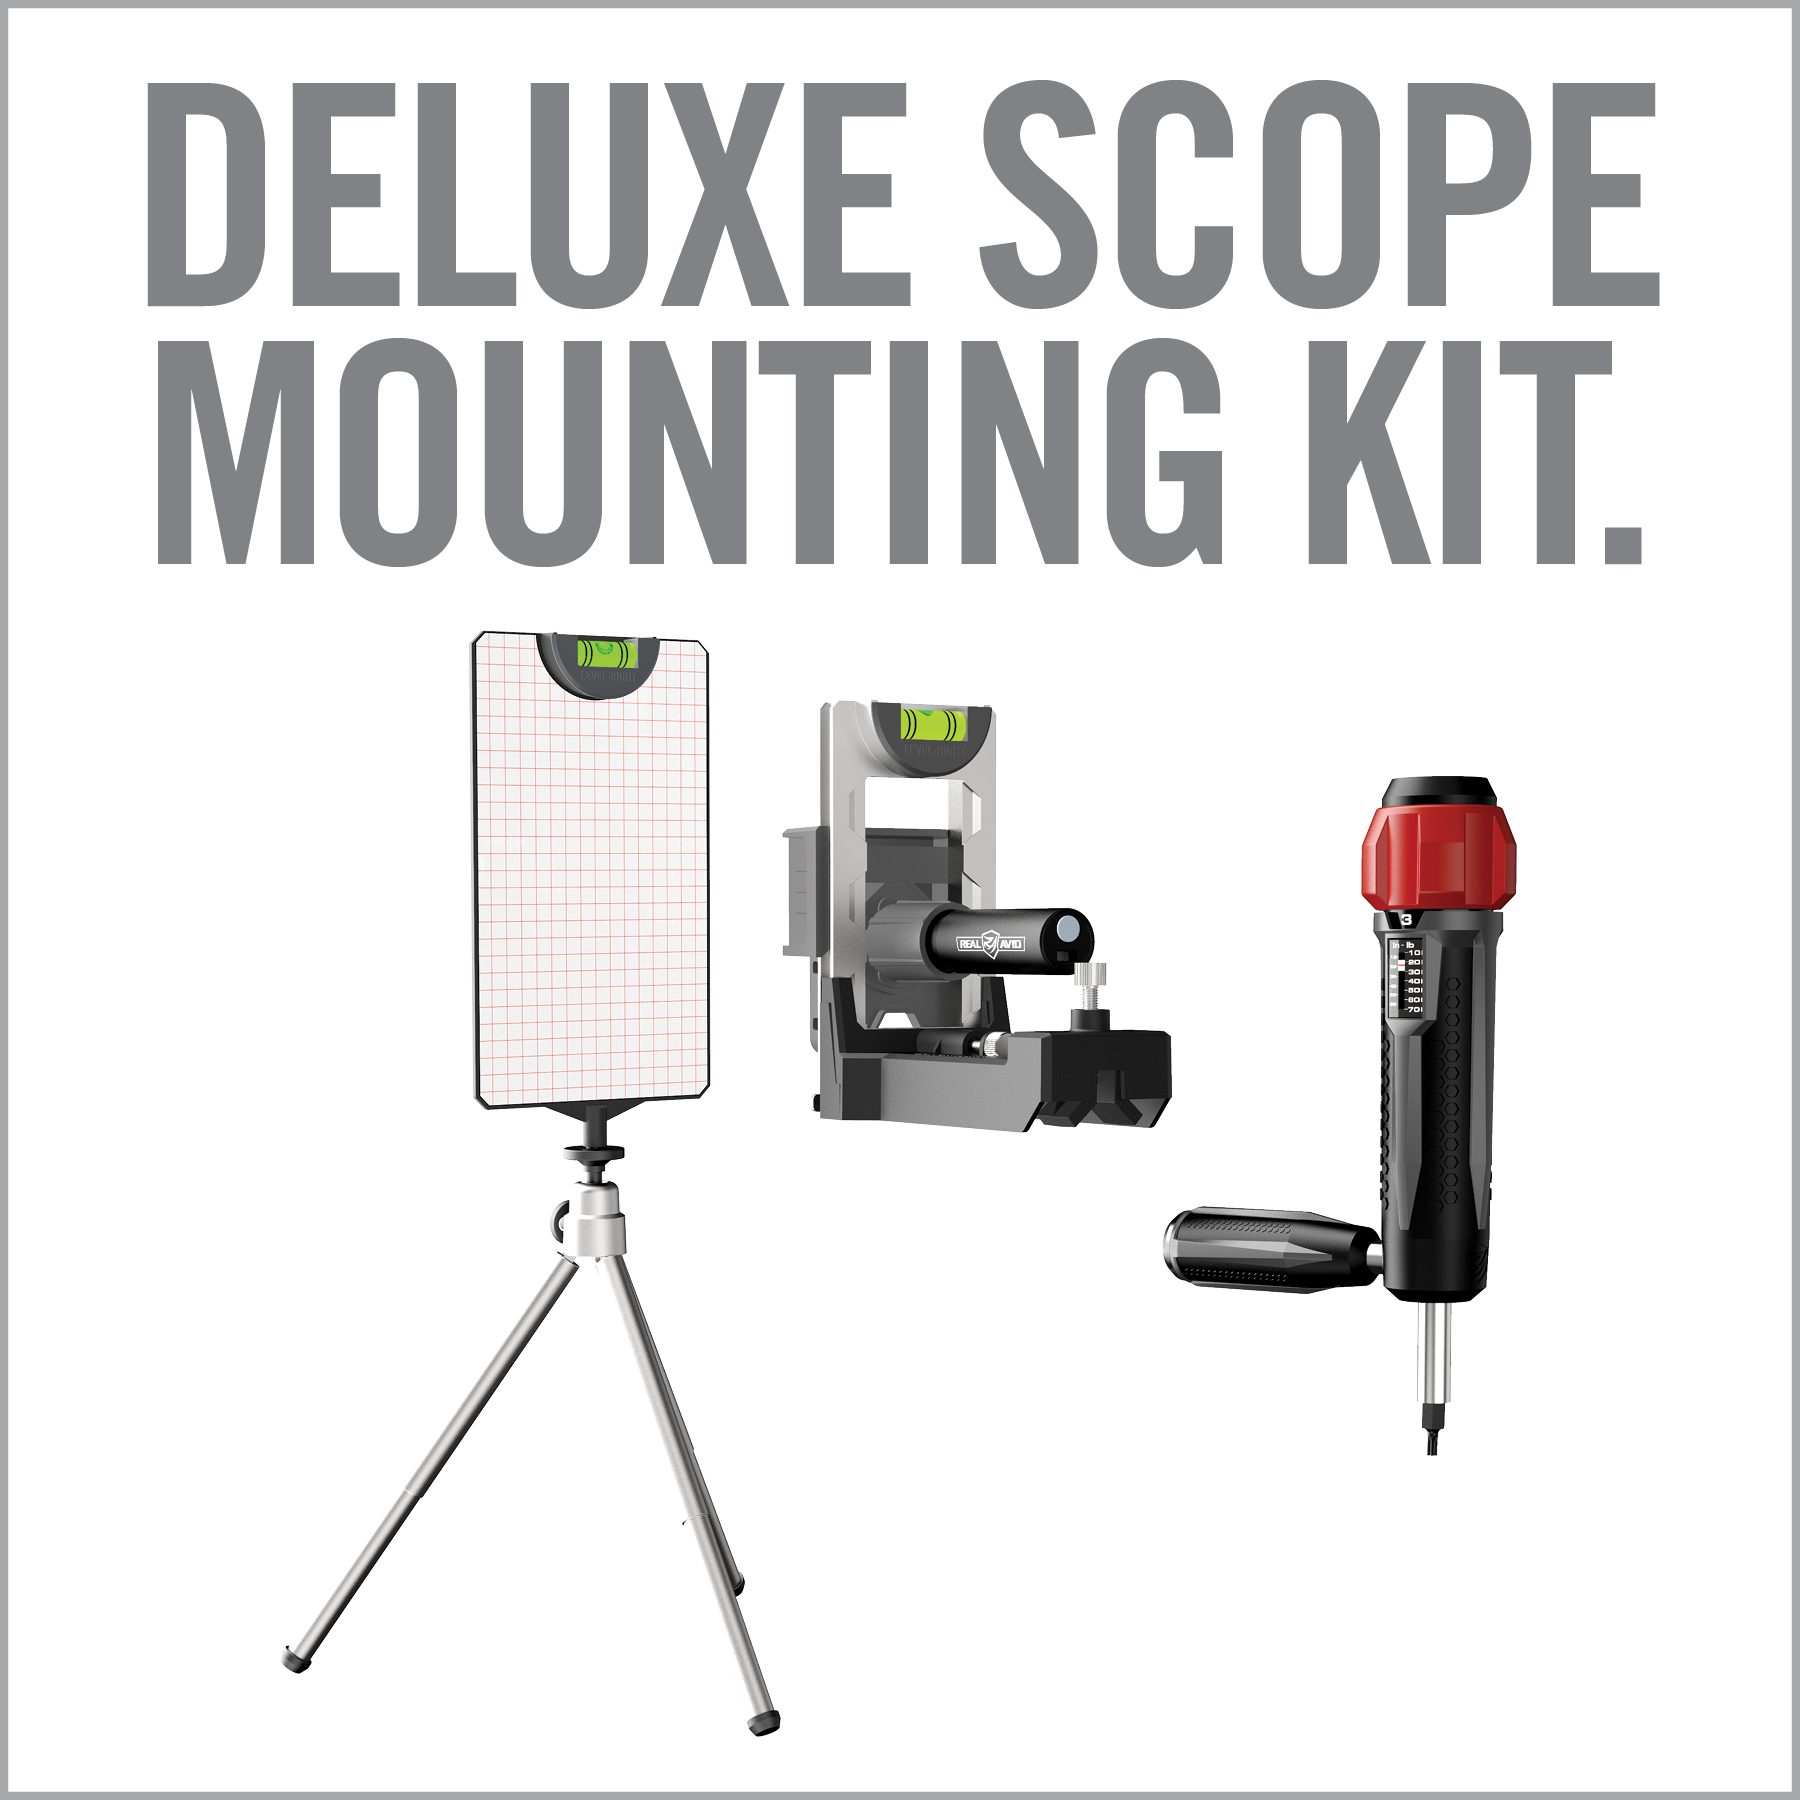 the deluxe scope mounting kit is shown